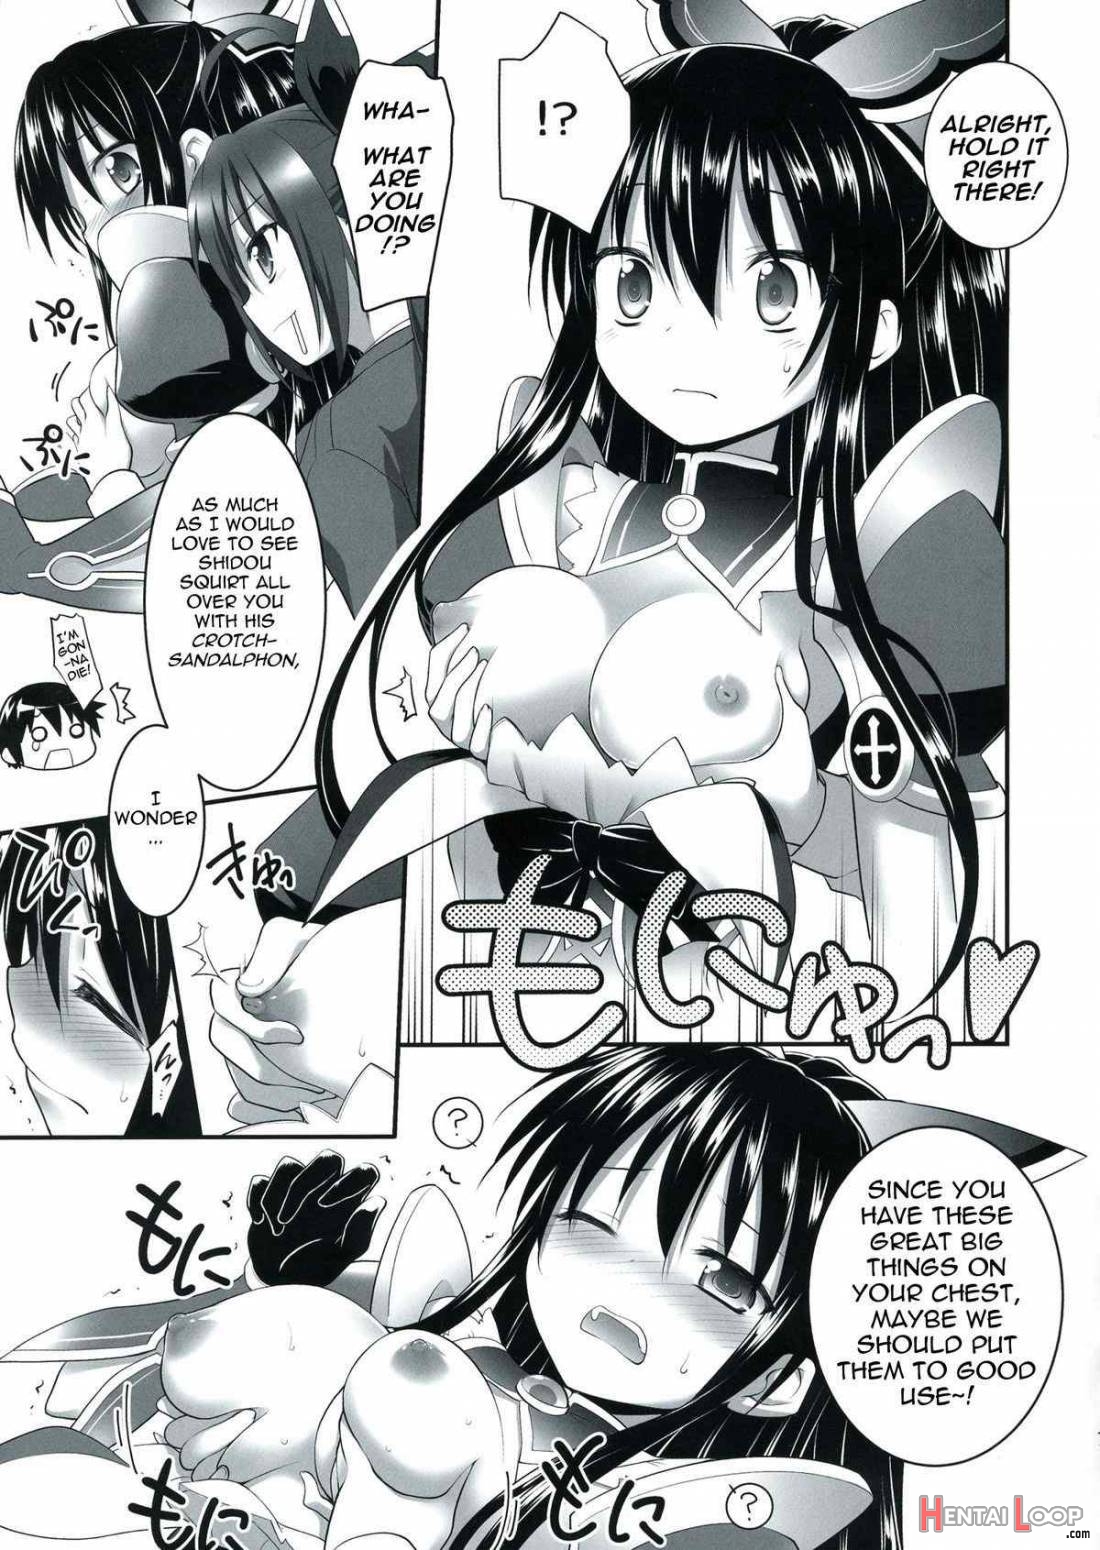 Highschool Of The Date page 7